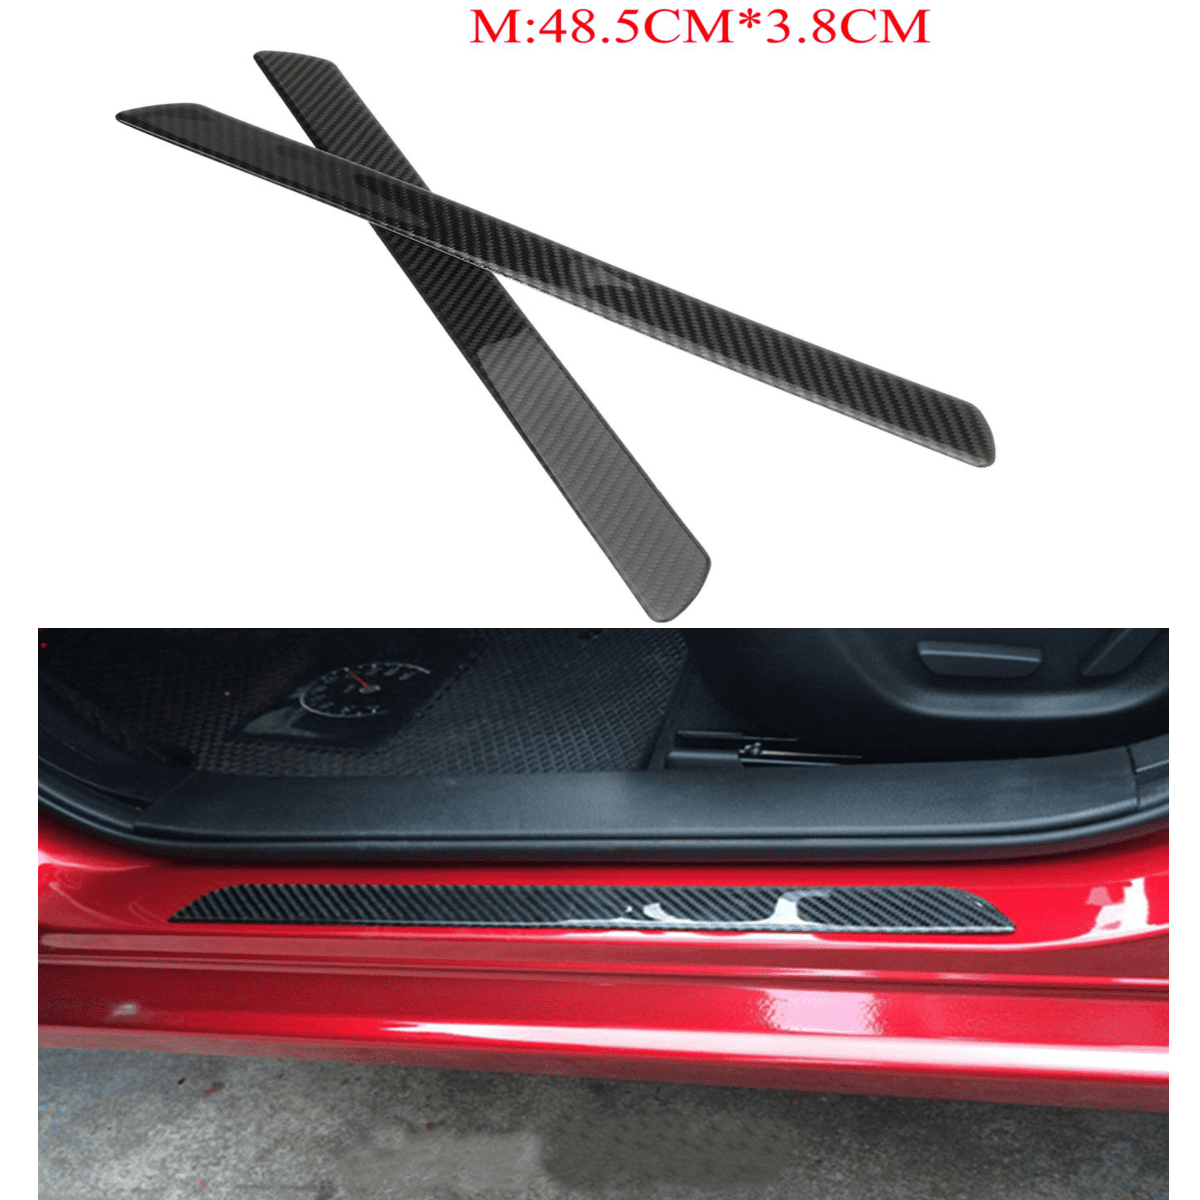 LOPLP Carbon Fiber Car Door Sill Scuff Plate Stickers Trim for Ford ST,Door Sill Protectors,Welcome Pedal Guard Pedal,Kick Plates Anti Scratch,Car Accessories,4 Pcs